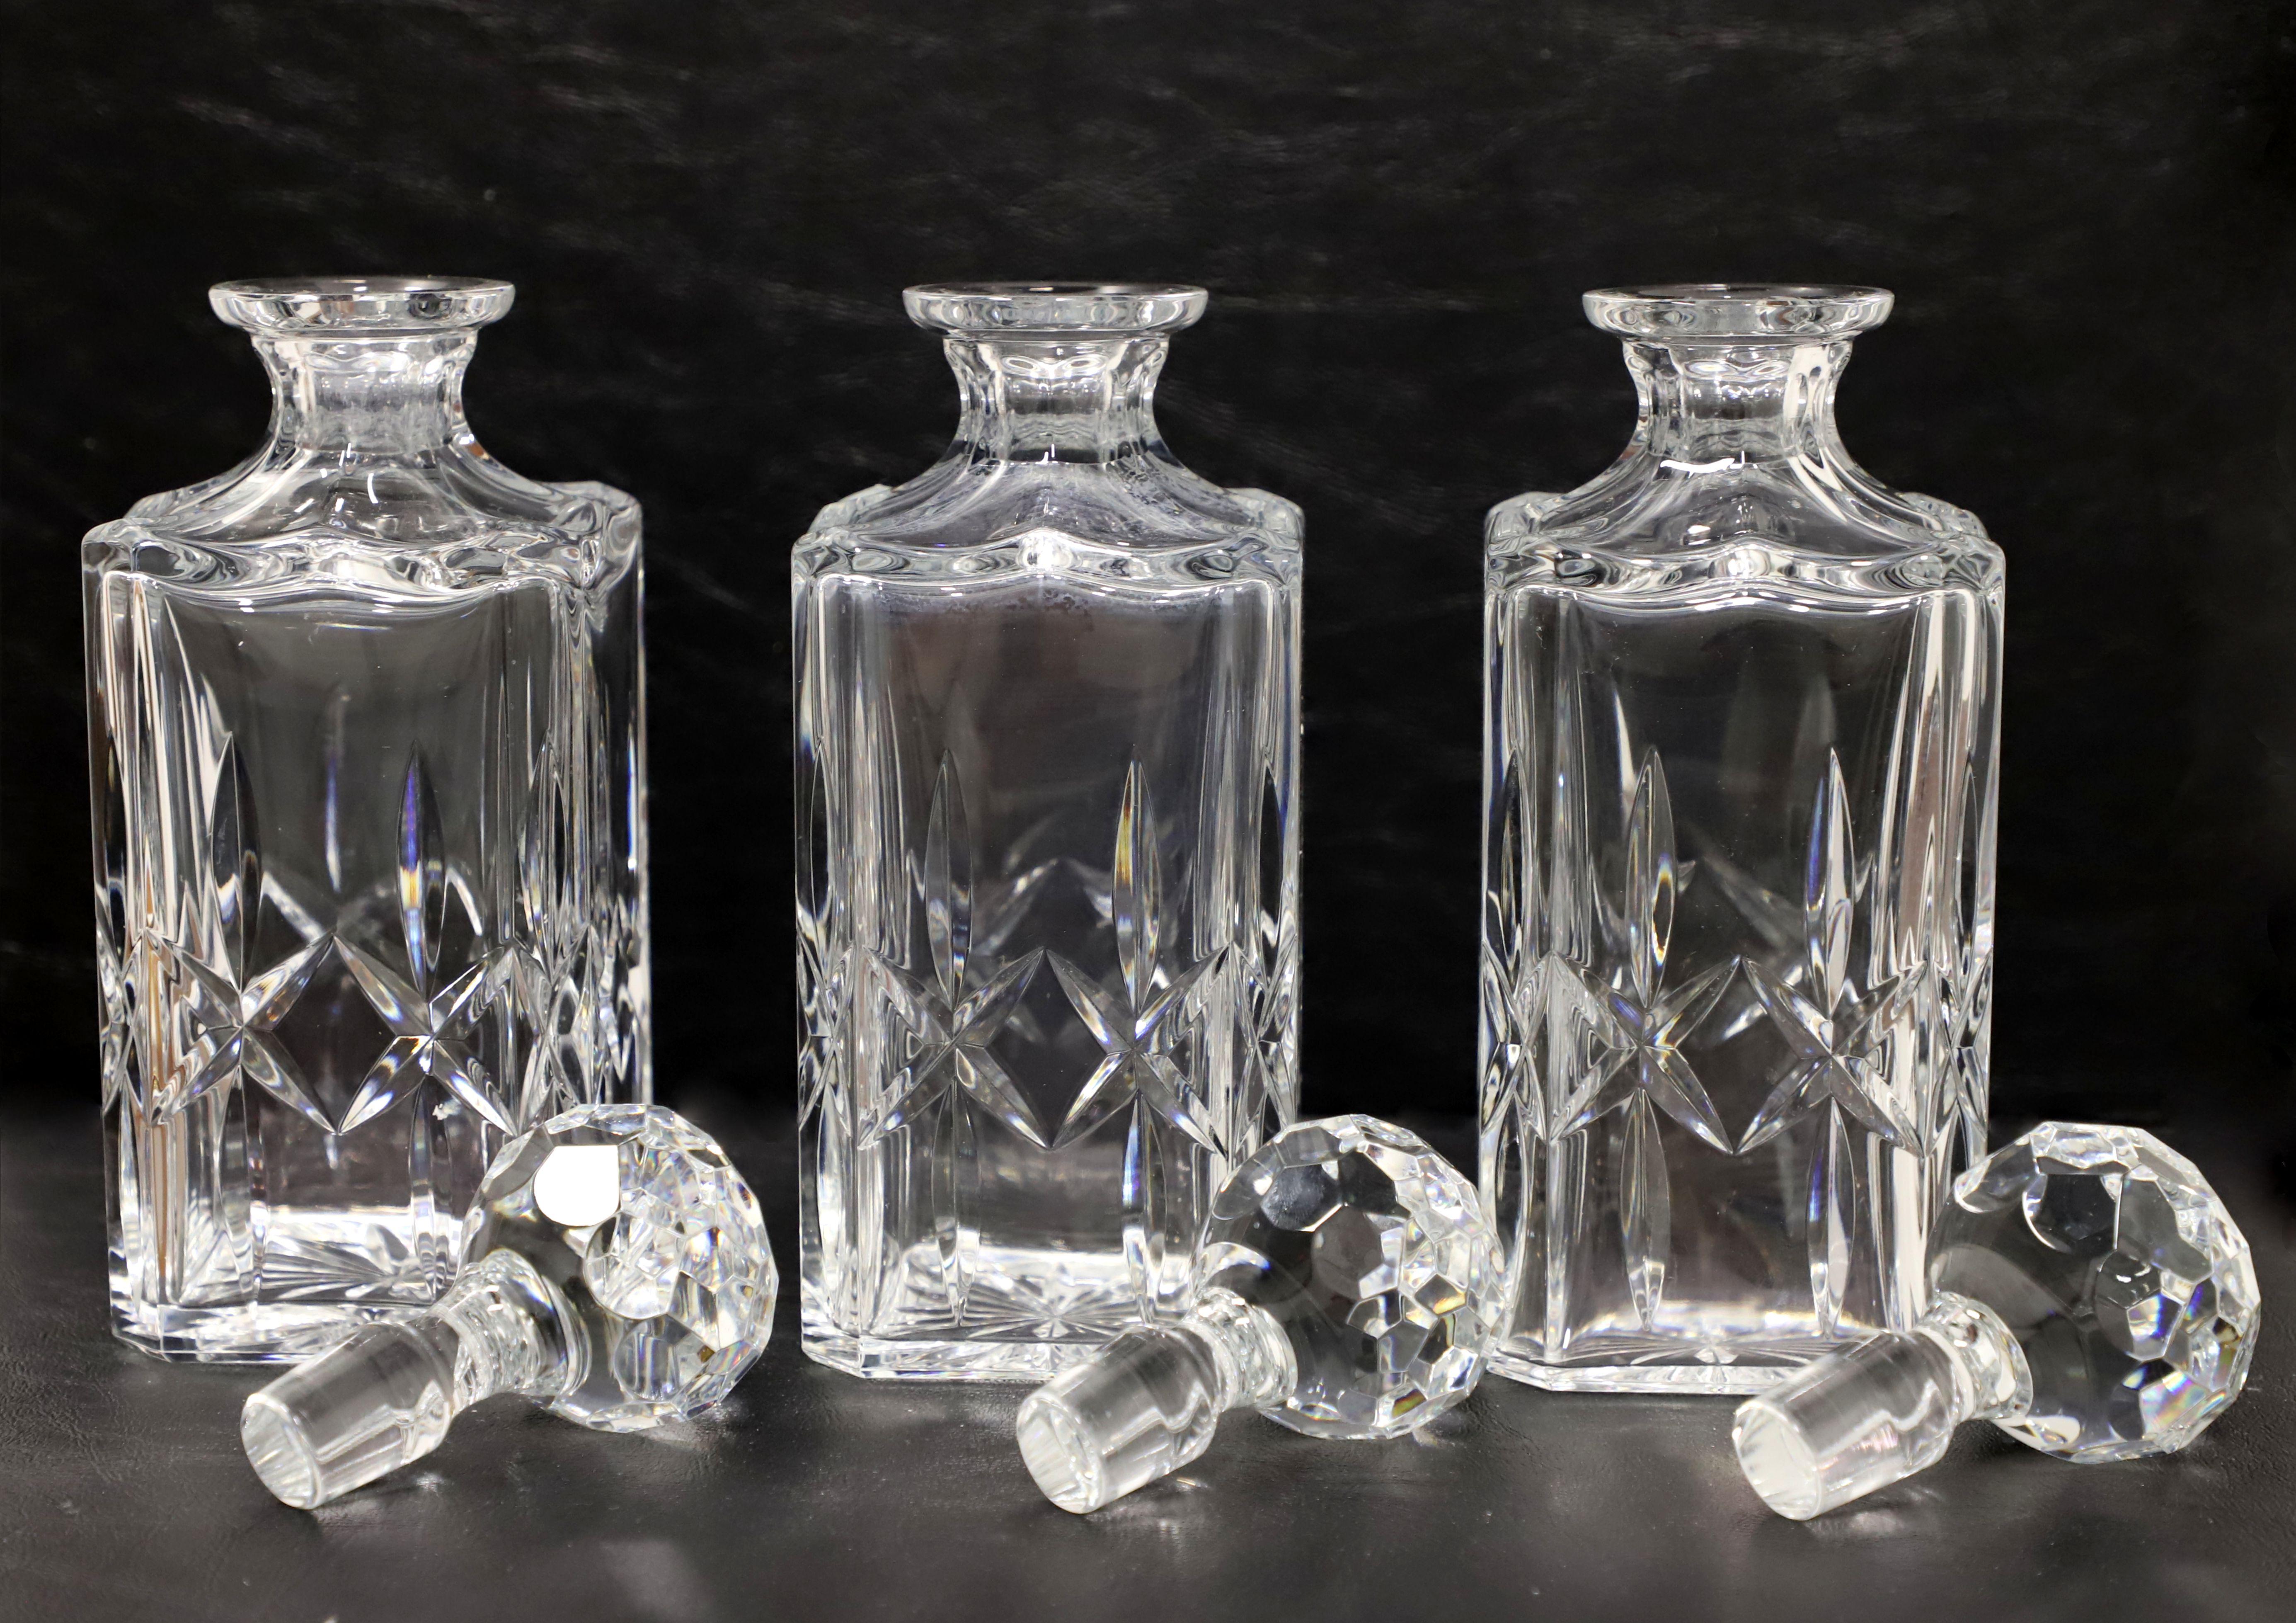 ATLANTIS CRISTASIA Trio of Late 20th Century Lead Crystal Decanters In Good Condition For Sale In Charlotte, NC